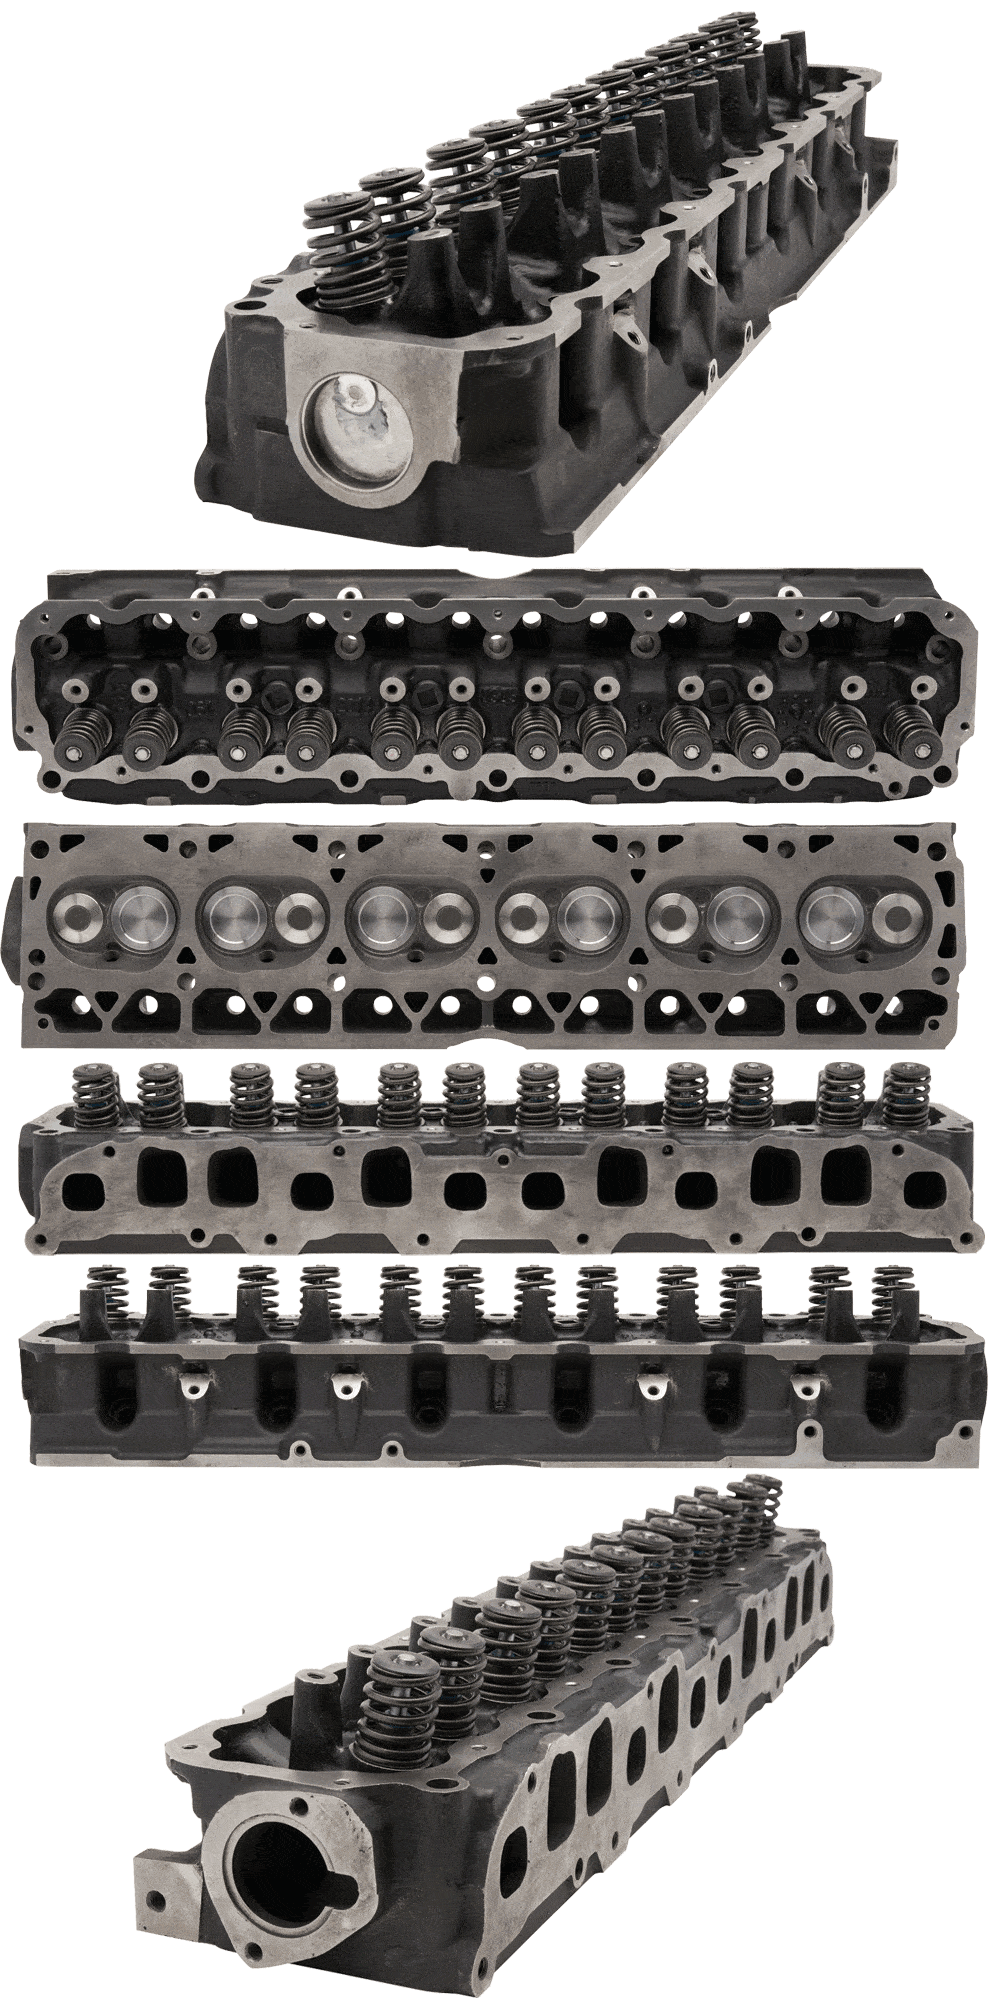 New Jeep Cherokee Laredo 4.0 OHV 0331 Cylinder Head Complete No